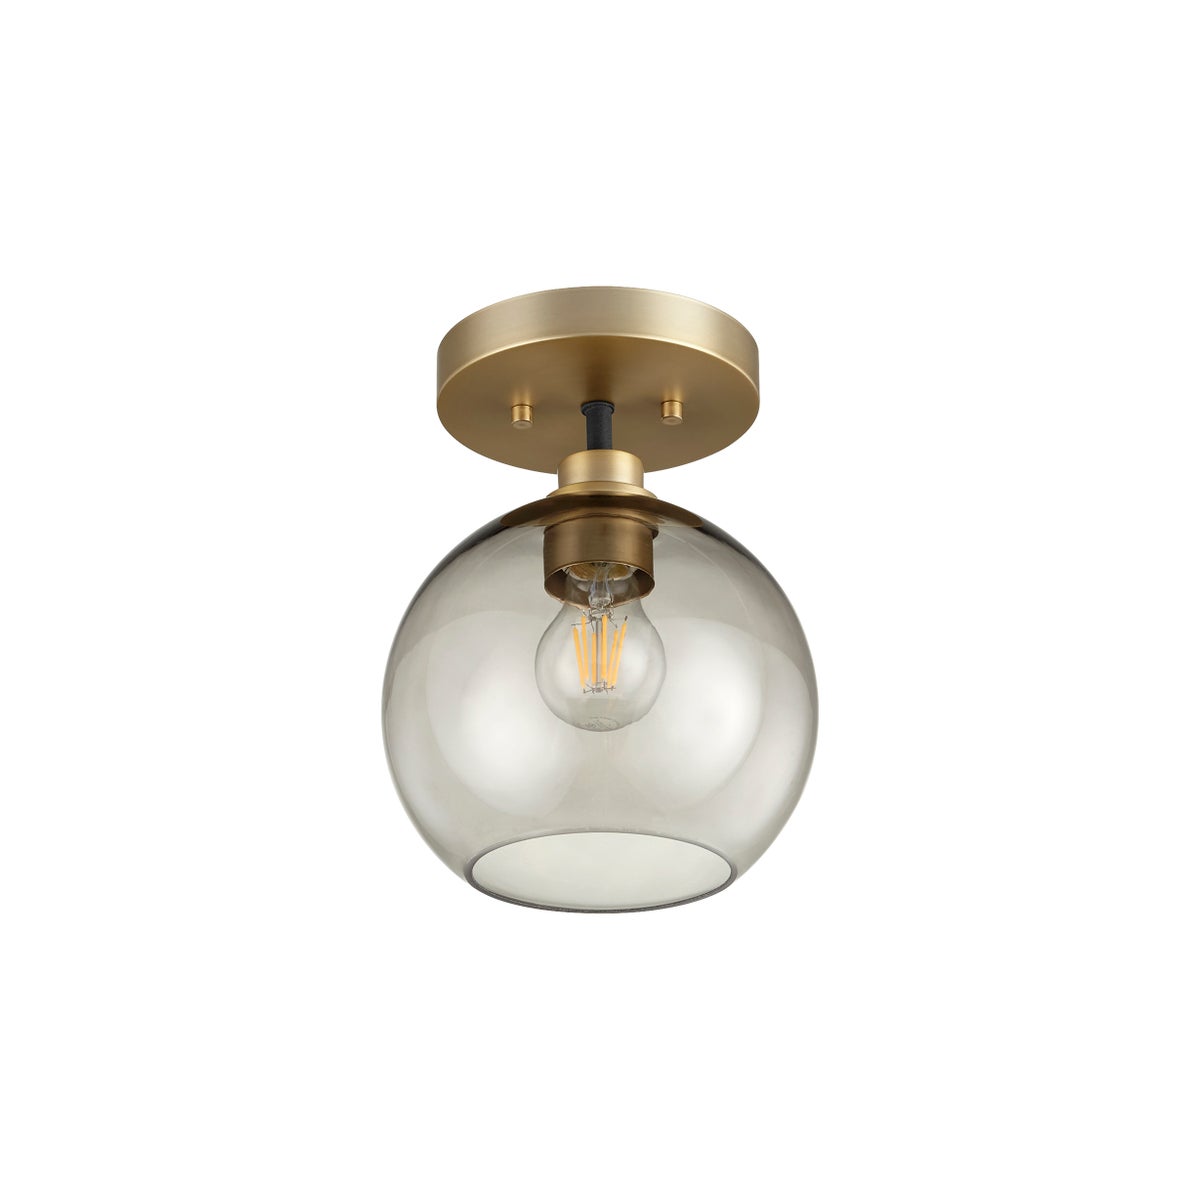 Clarion 1-Light Black/Aged Brass Ceiling Mount